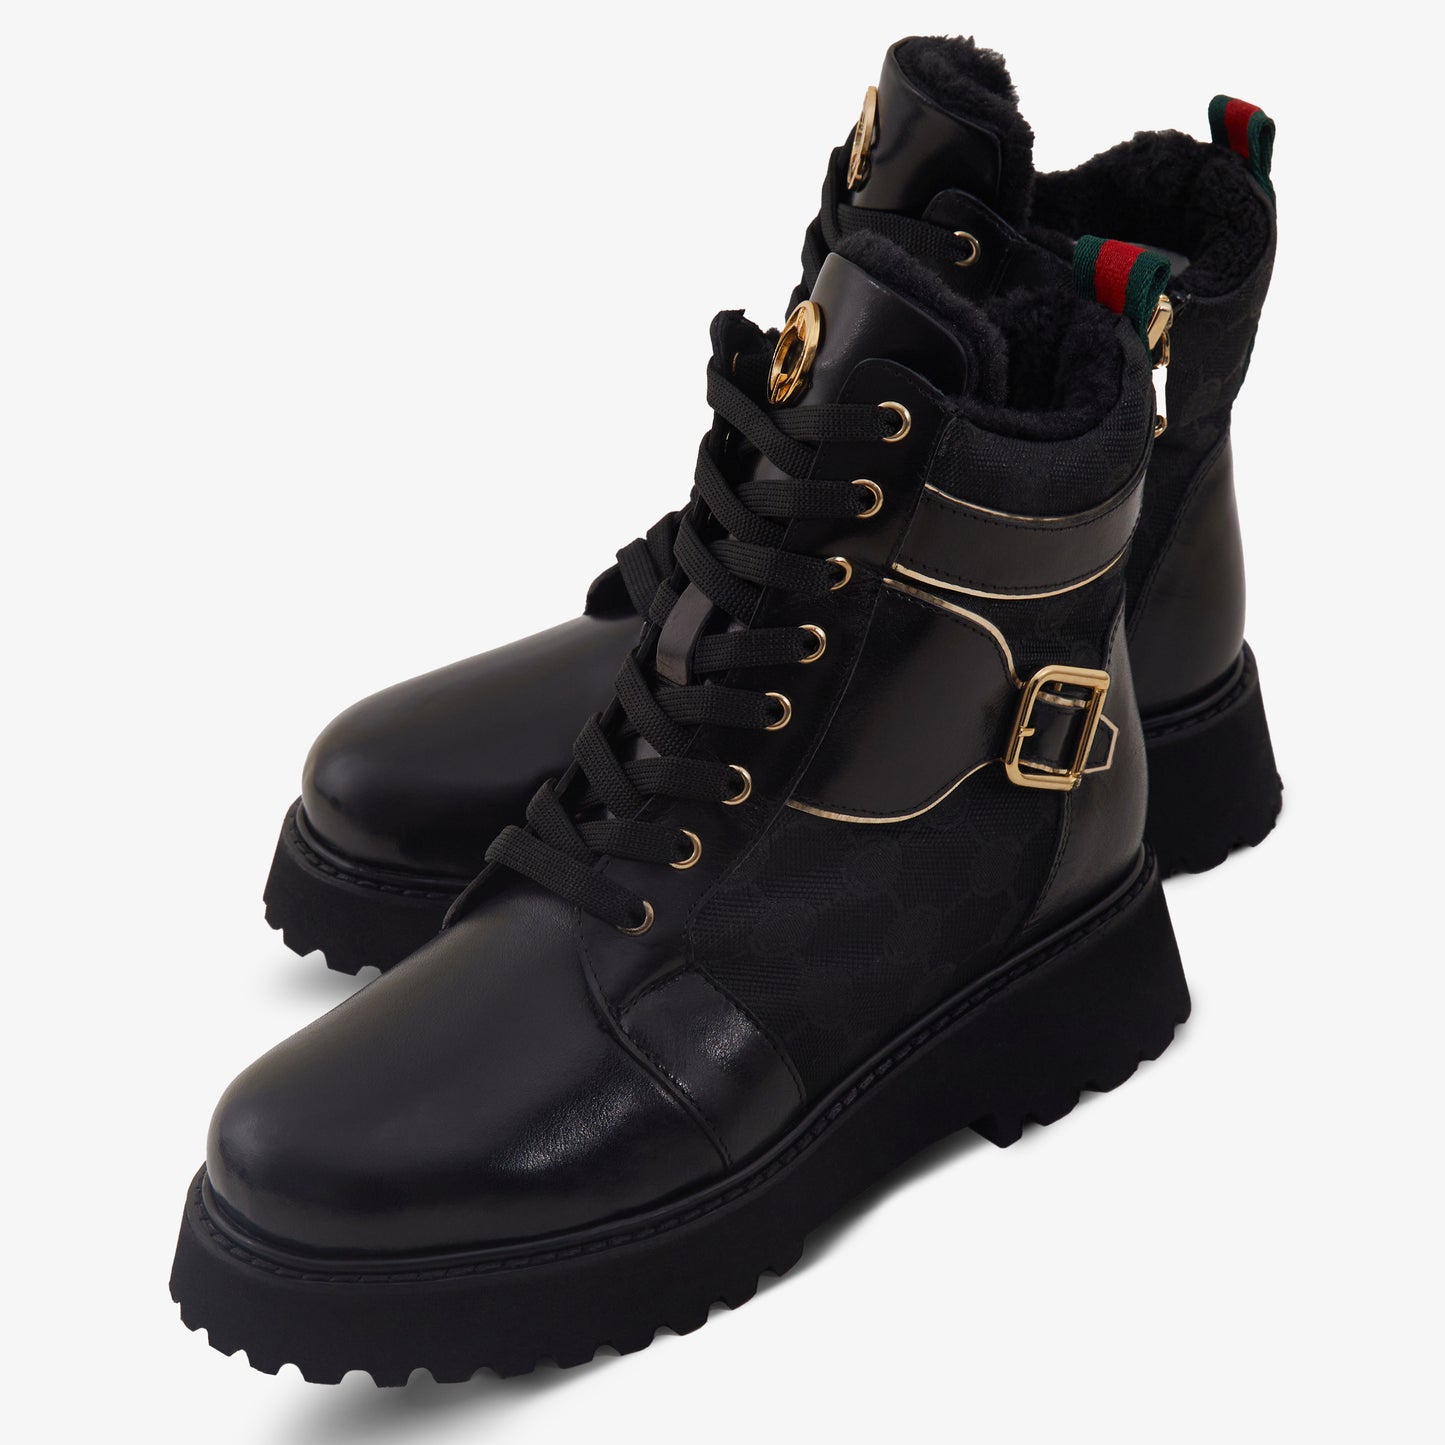 The Boston Black Leather Lace-Up Ankle Women Boot With a Side Zipper